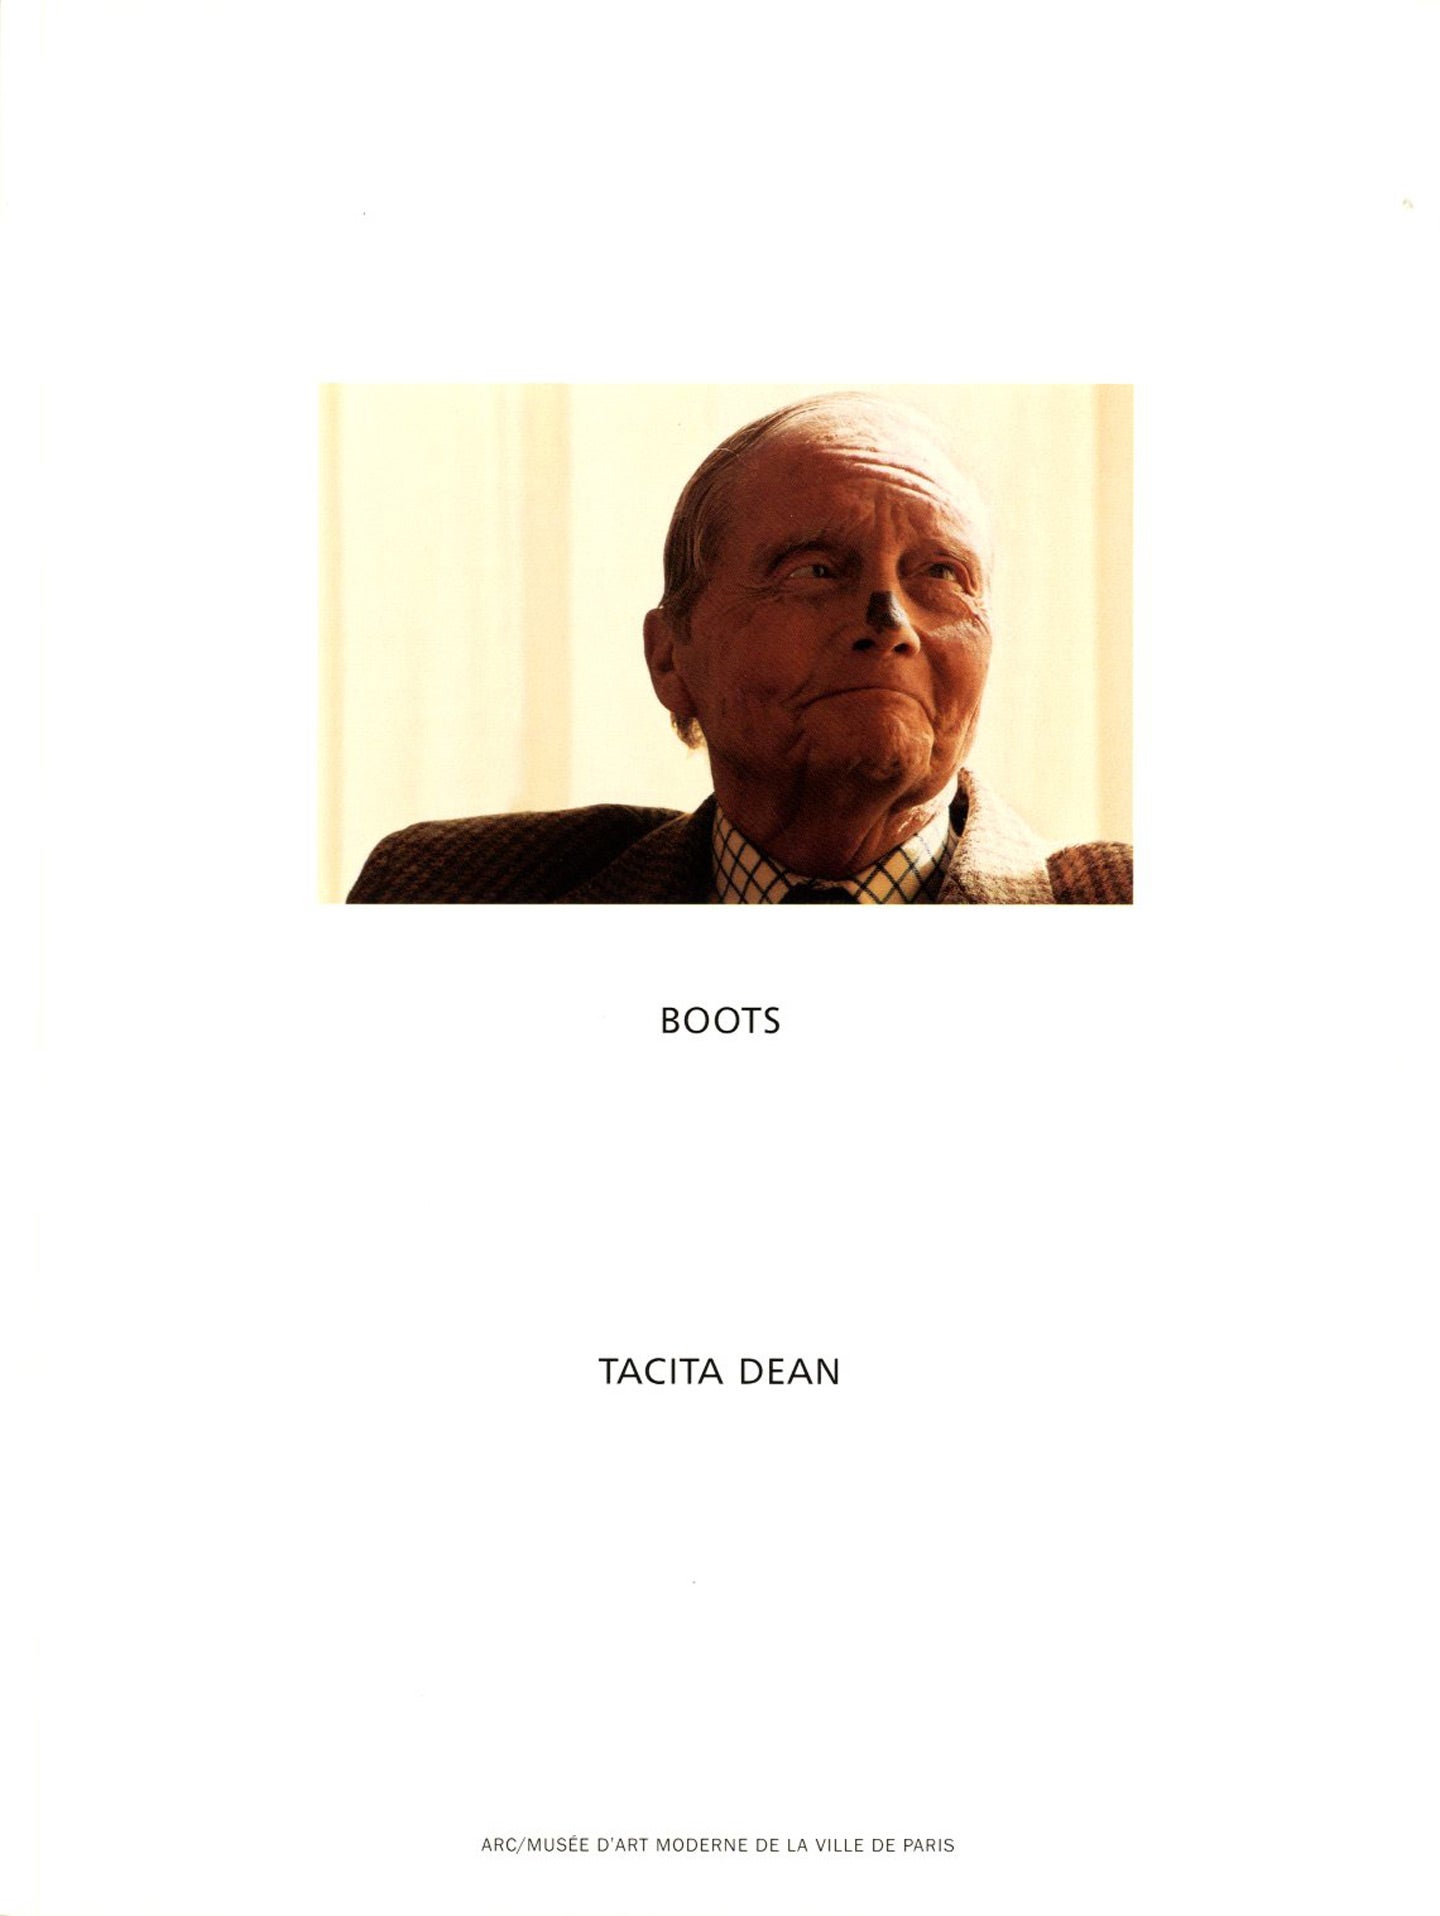 Tacita Dean: Seven Books (Selected Writings, 12.10.02 - 21.12.02, W.G. Sebald, The Russian Ending, Boots, Complete Works and Filmography 1991-2003, and Essays)